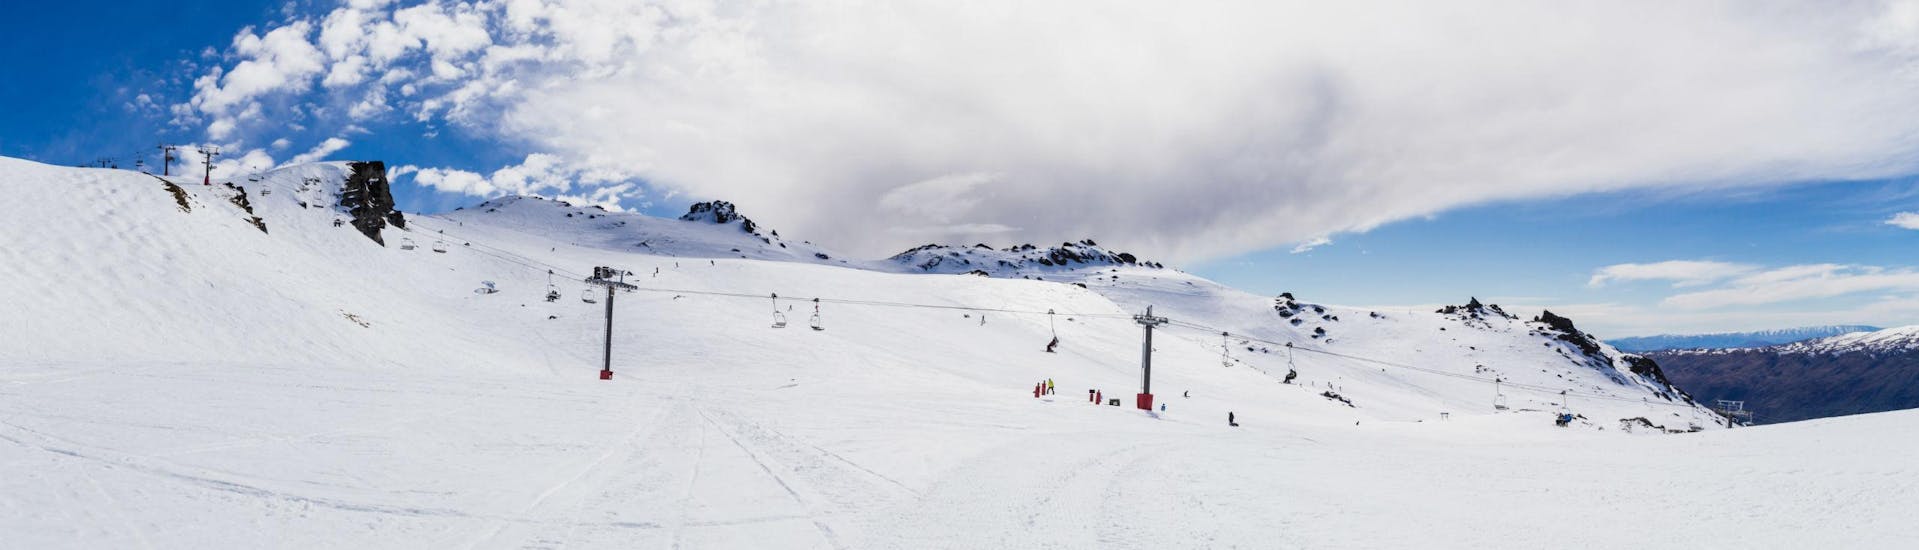 An image of the snow park in the Cardrona Alpine Resort close to Queenstown, where visitors can book ski lessons and learn to ski.